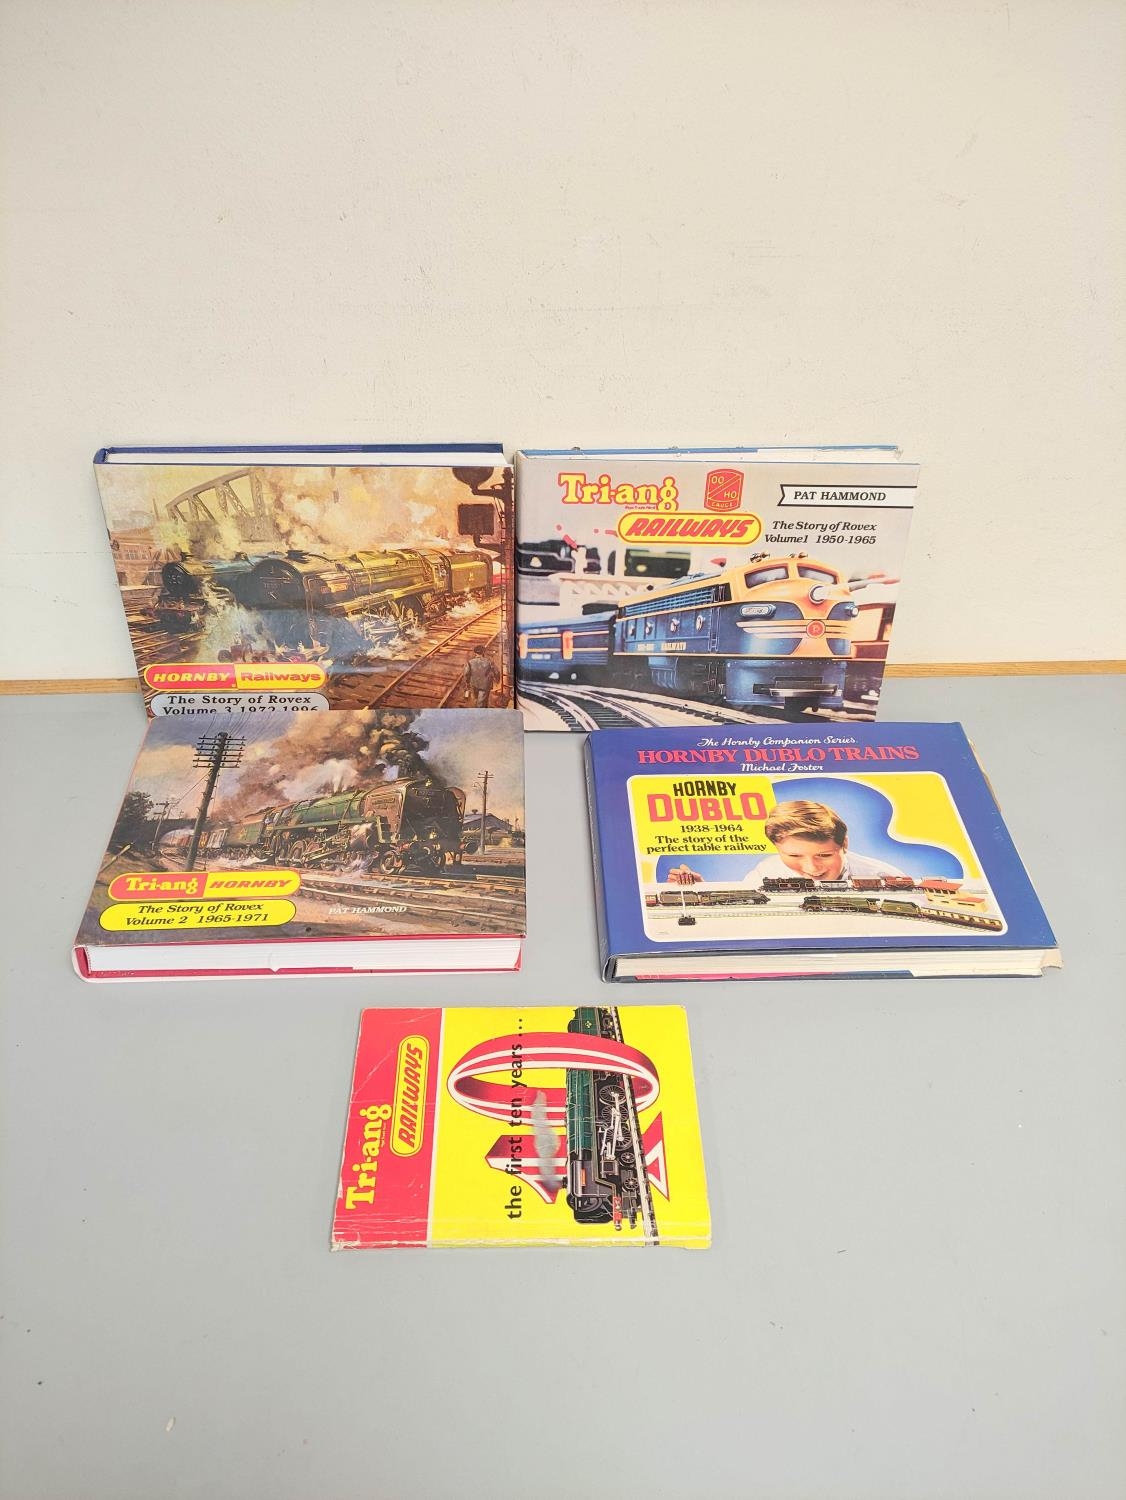 Model railway New Cavendish books to include M.Foster Hornby Dublo Trains, and Triang-Hornby The